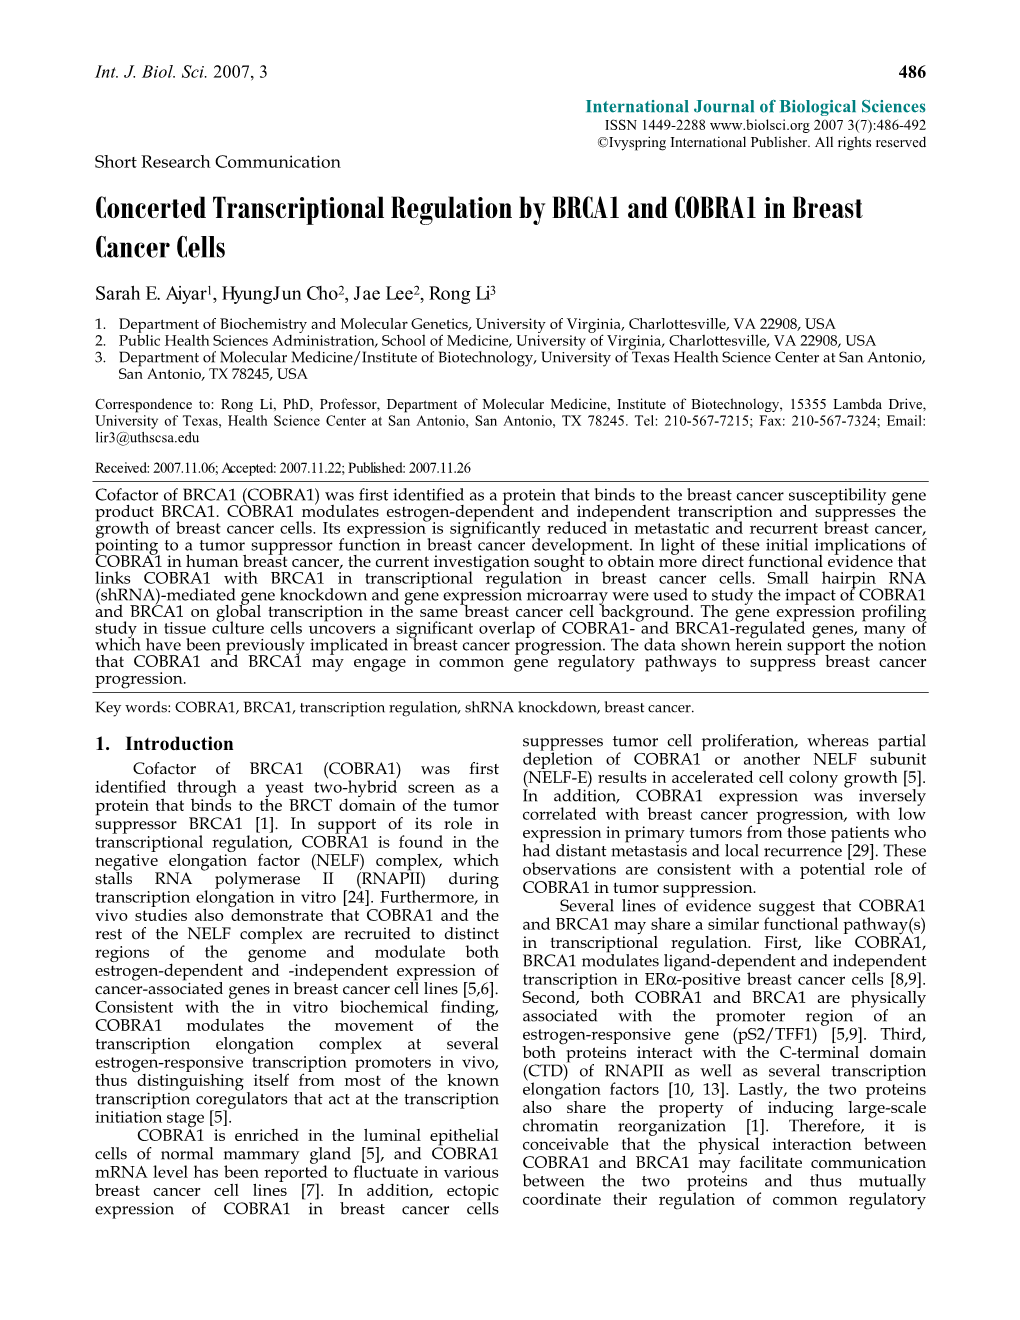 Concerted Transcriptional Regulation by BRCA1 and COBRA1 in Breast Cancer Cells Sarah E